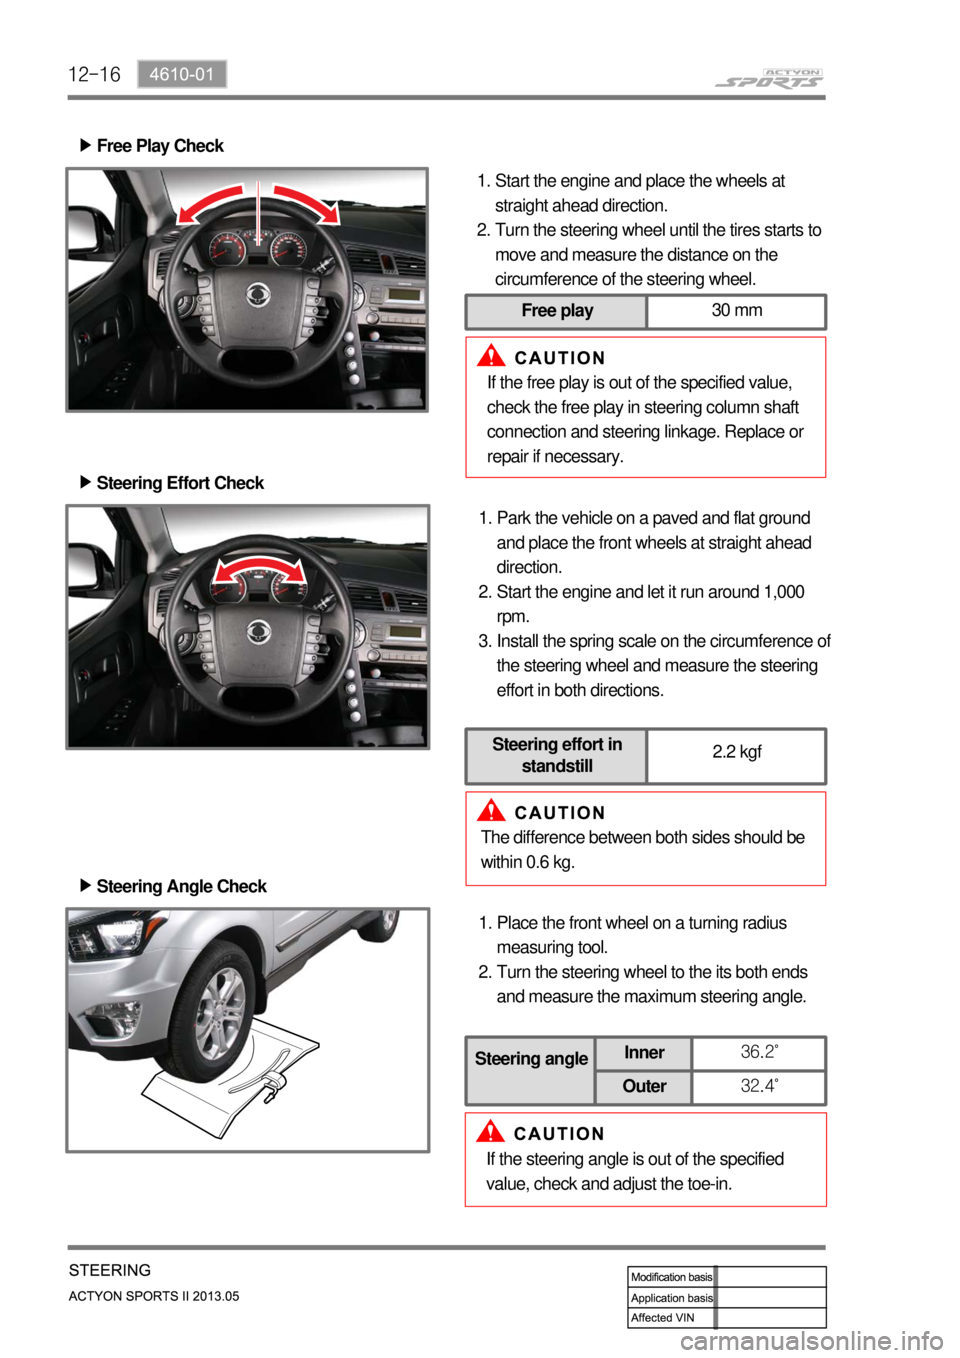 SSANGYONG NEW ACTYON SPORTS 2013  Service Manual 12-16
The difference between both sides should be 
within 0.6 kg.Park the vehicle on a paved and flat ground 
and place the front wheels at straight ahead 
direction.
Start the engine and let it run a